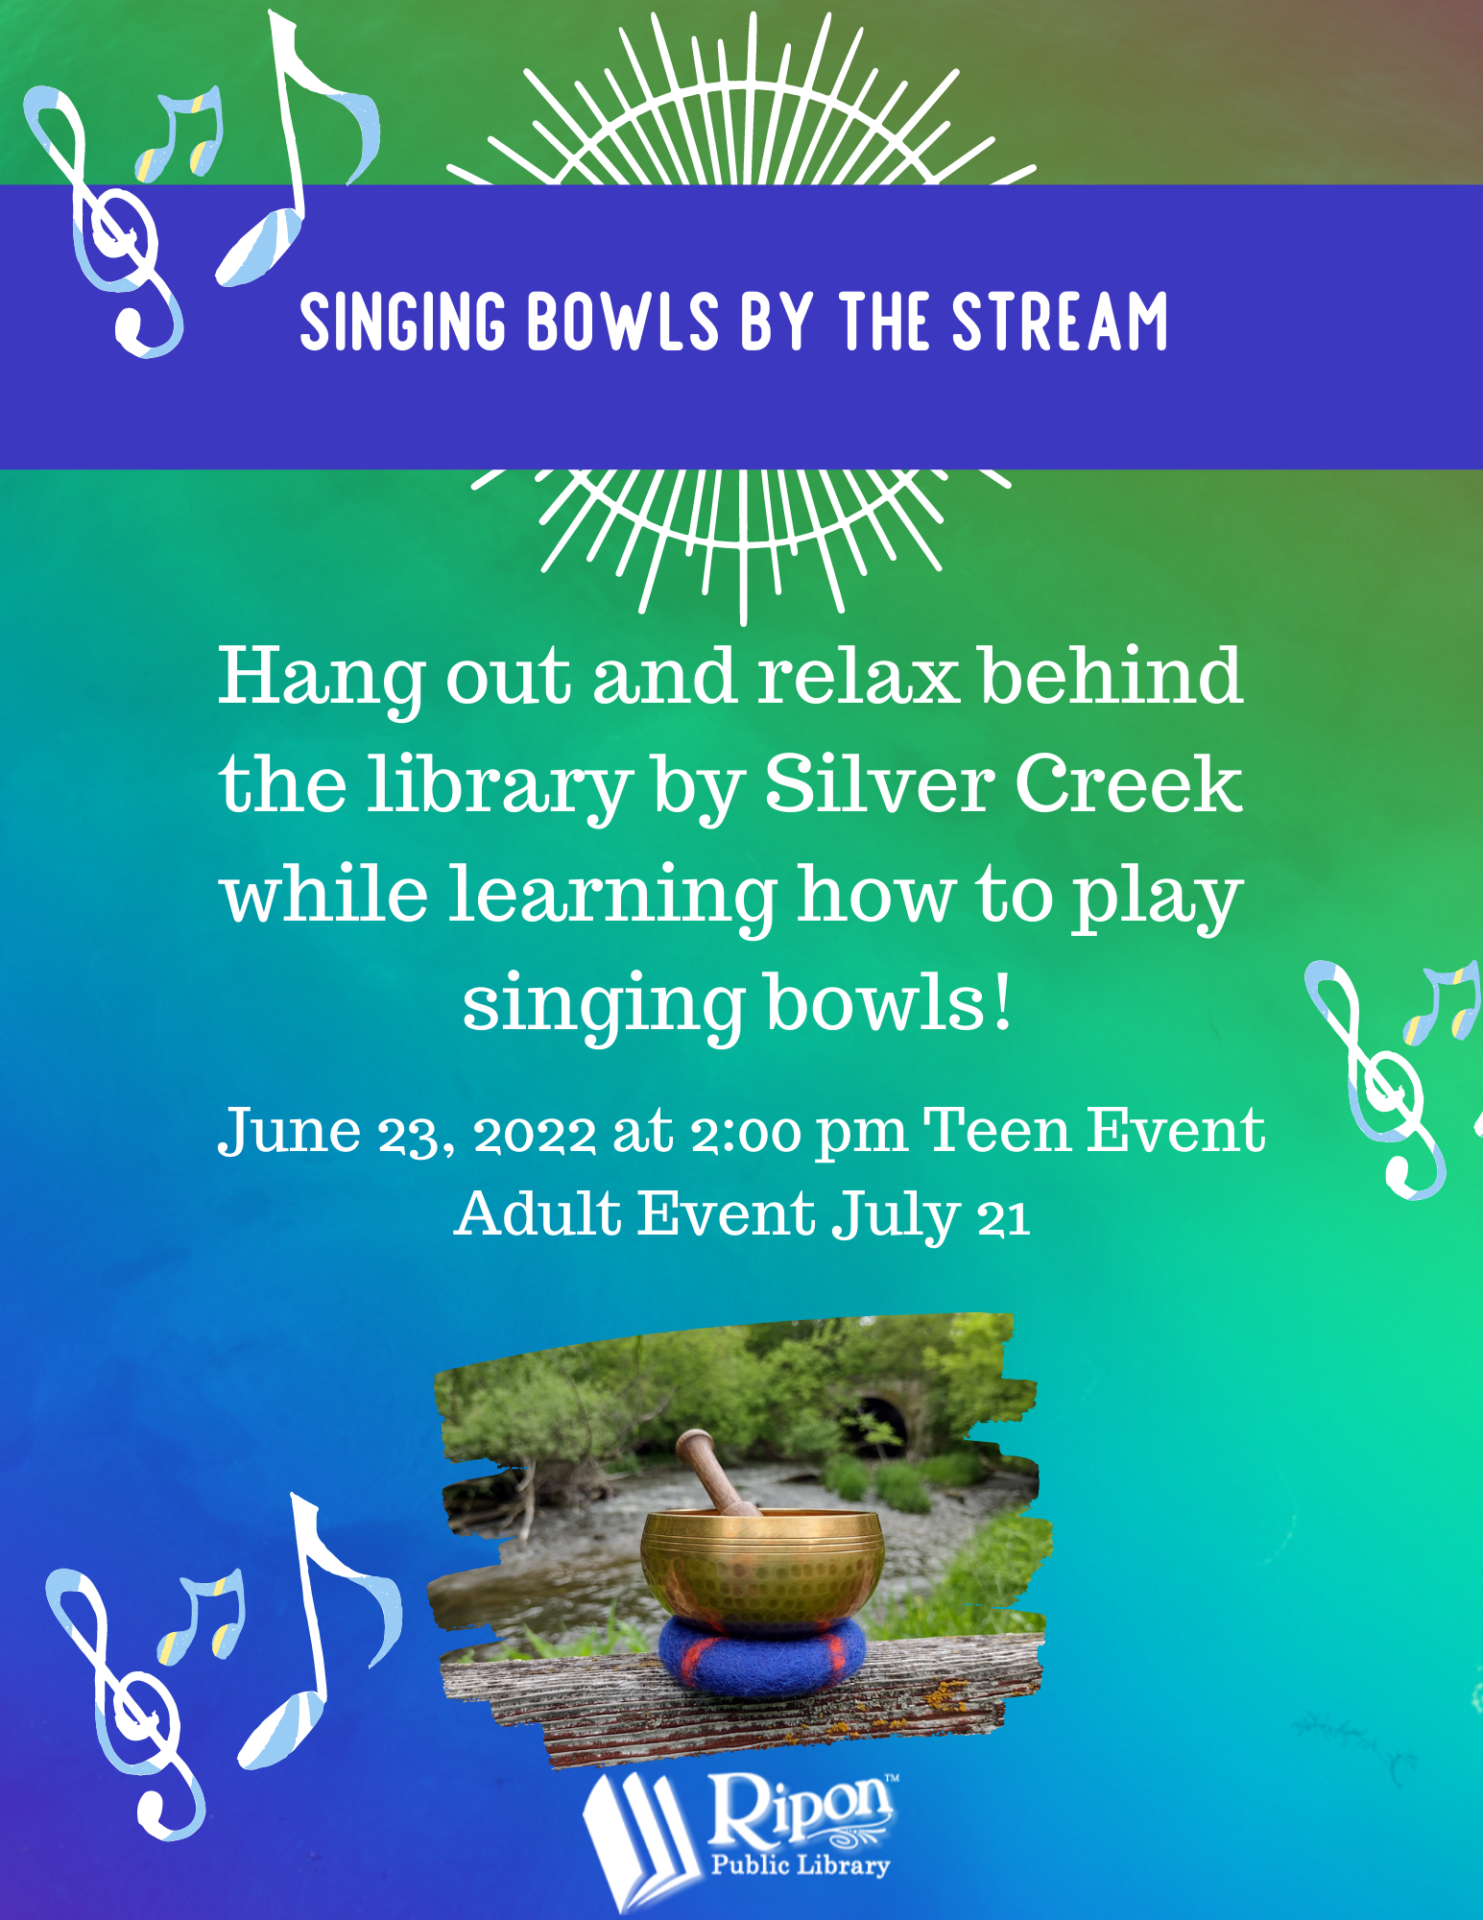 Singing Bowls by the Stream